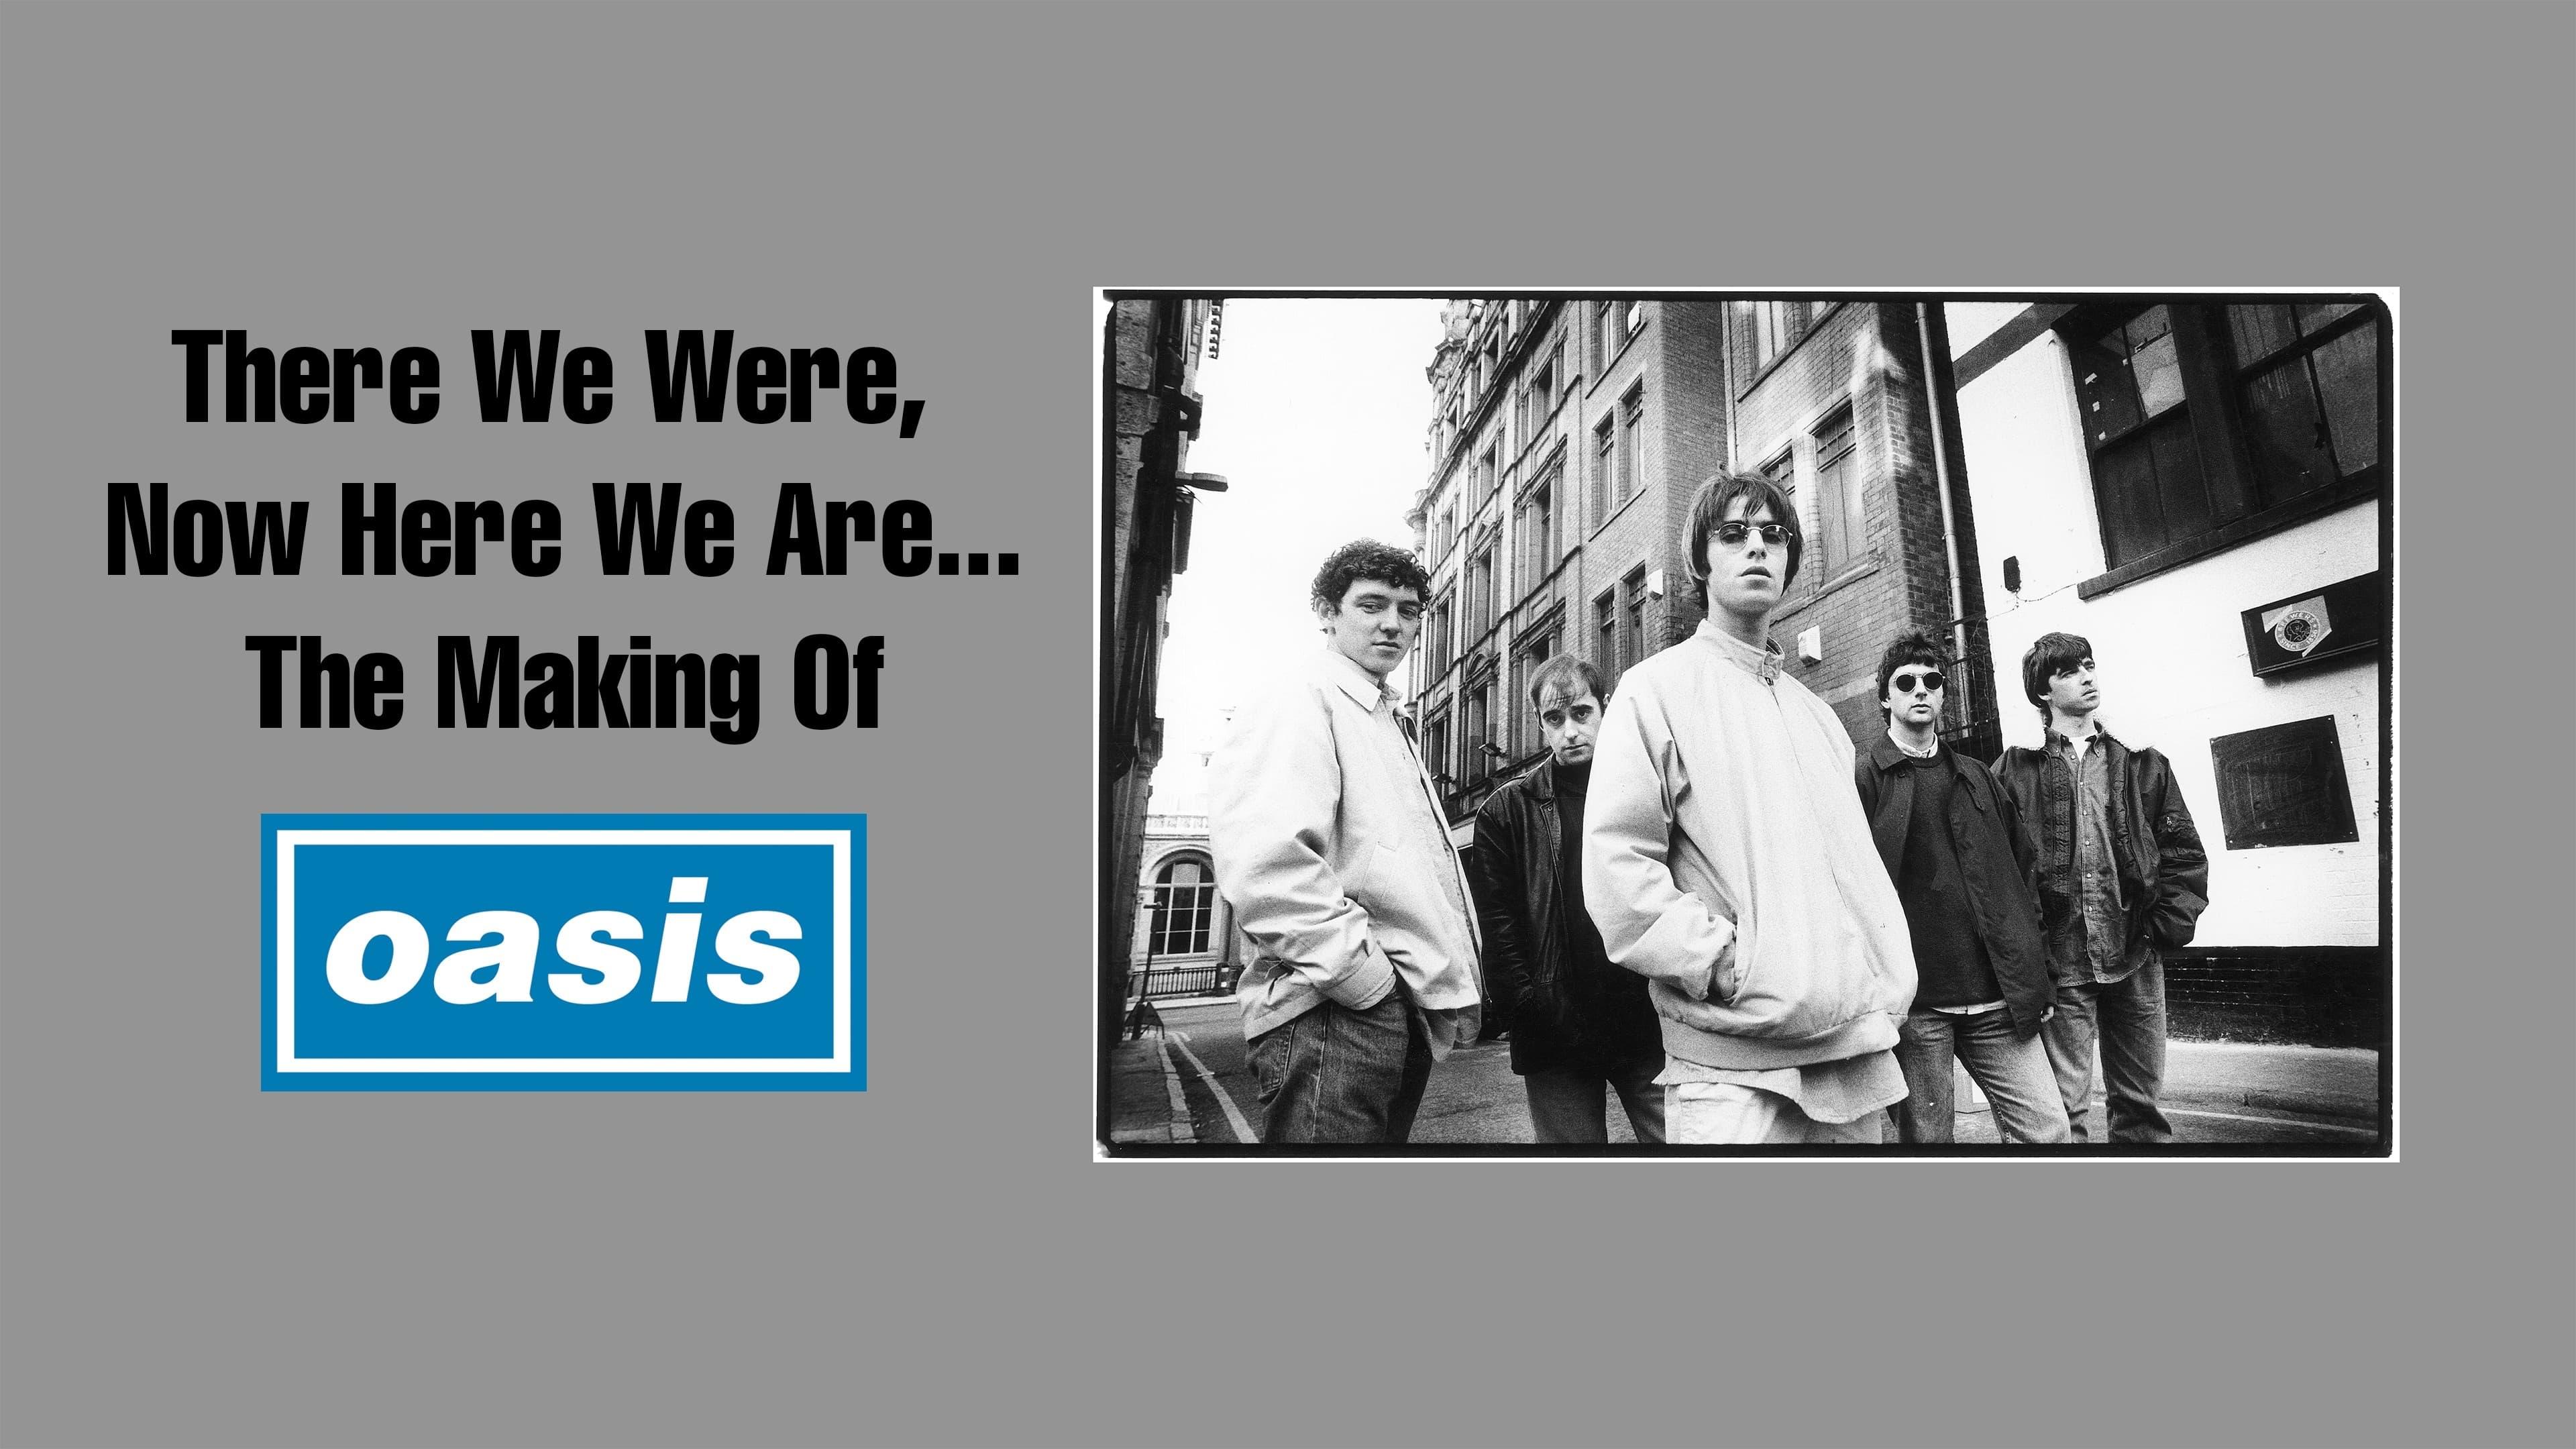 There We Were, Now Here We Are... The Making of Oasis backdrop